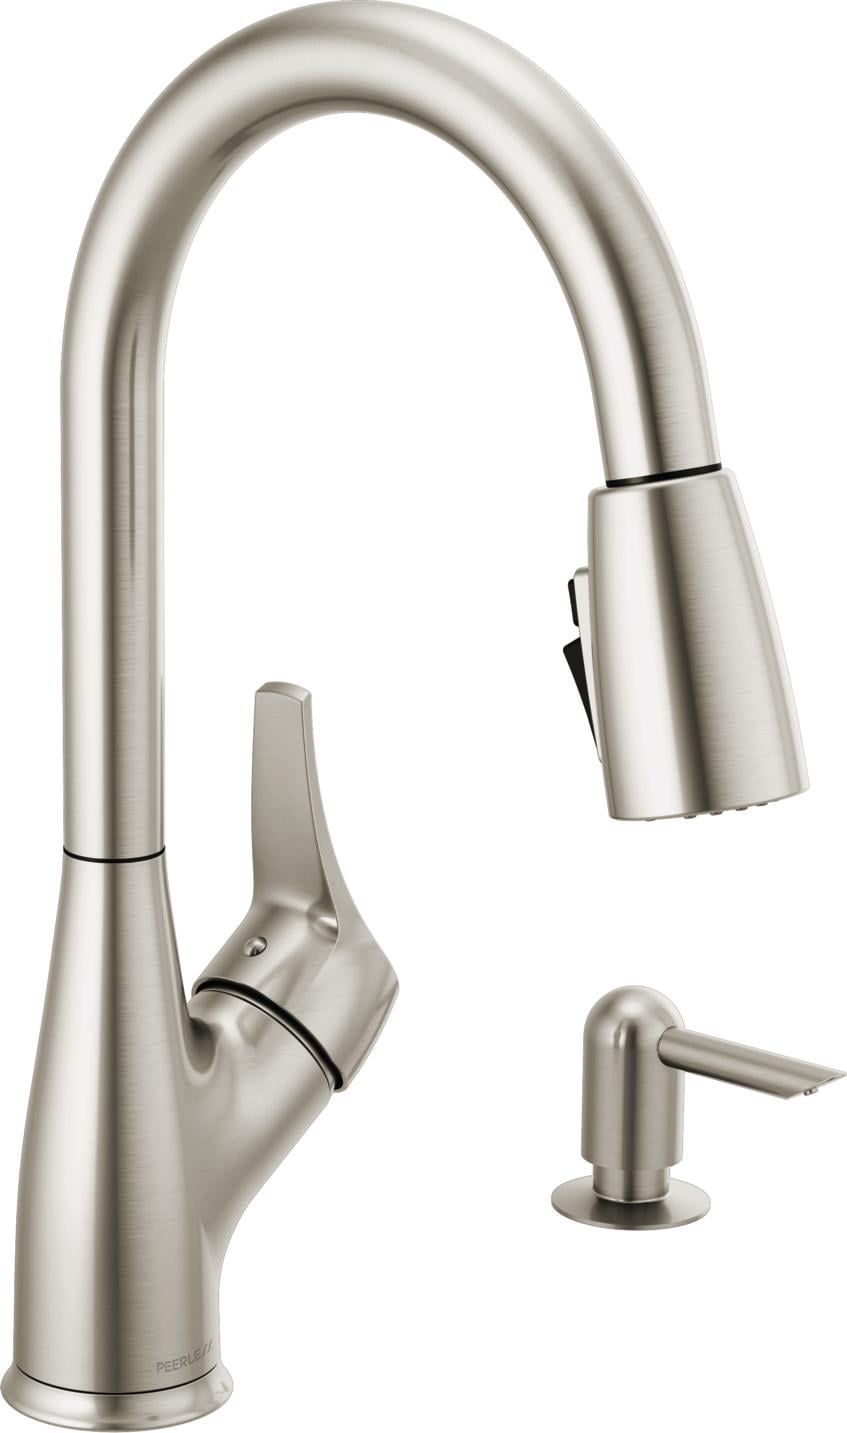 Peerless Apex One Handle Pull-Down Kitchen Faucet with Soap Dispenser Peerless Stainless Steel Kitchen Faucet